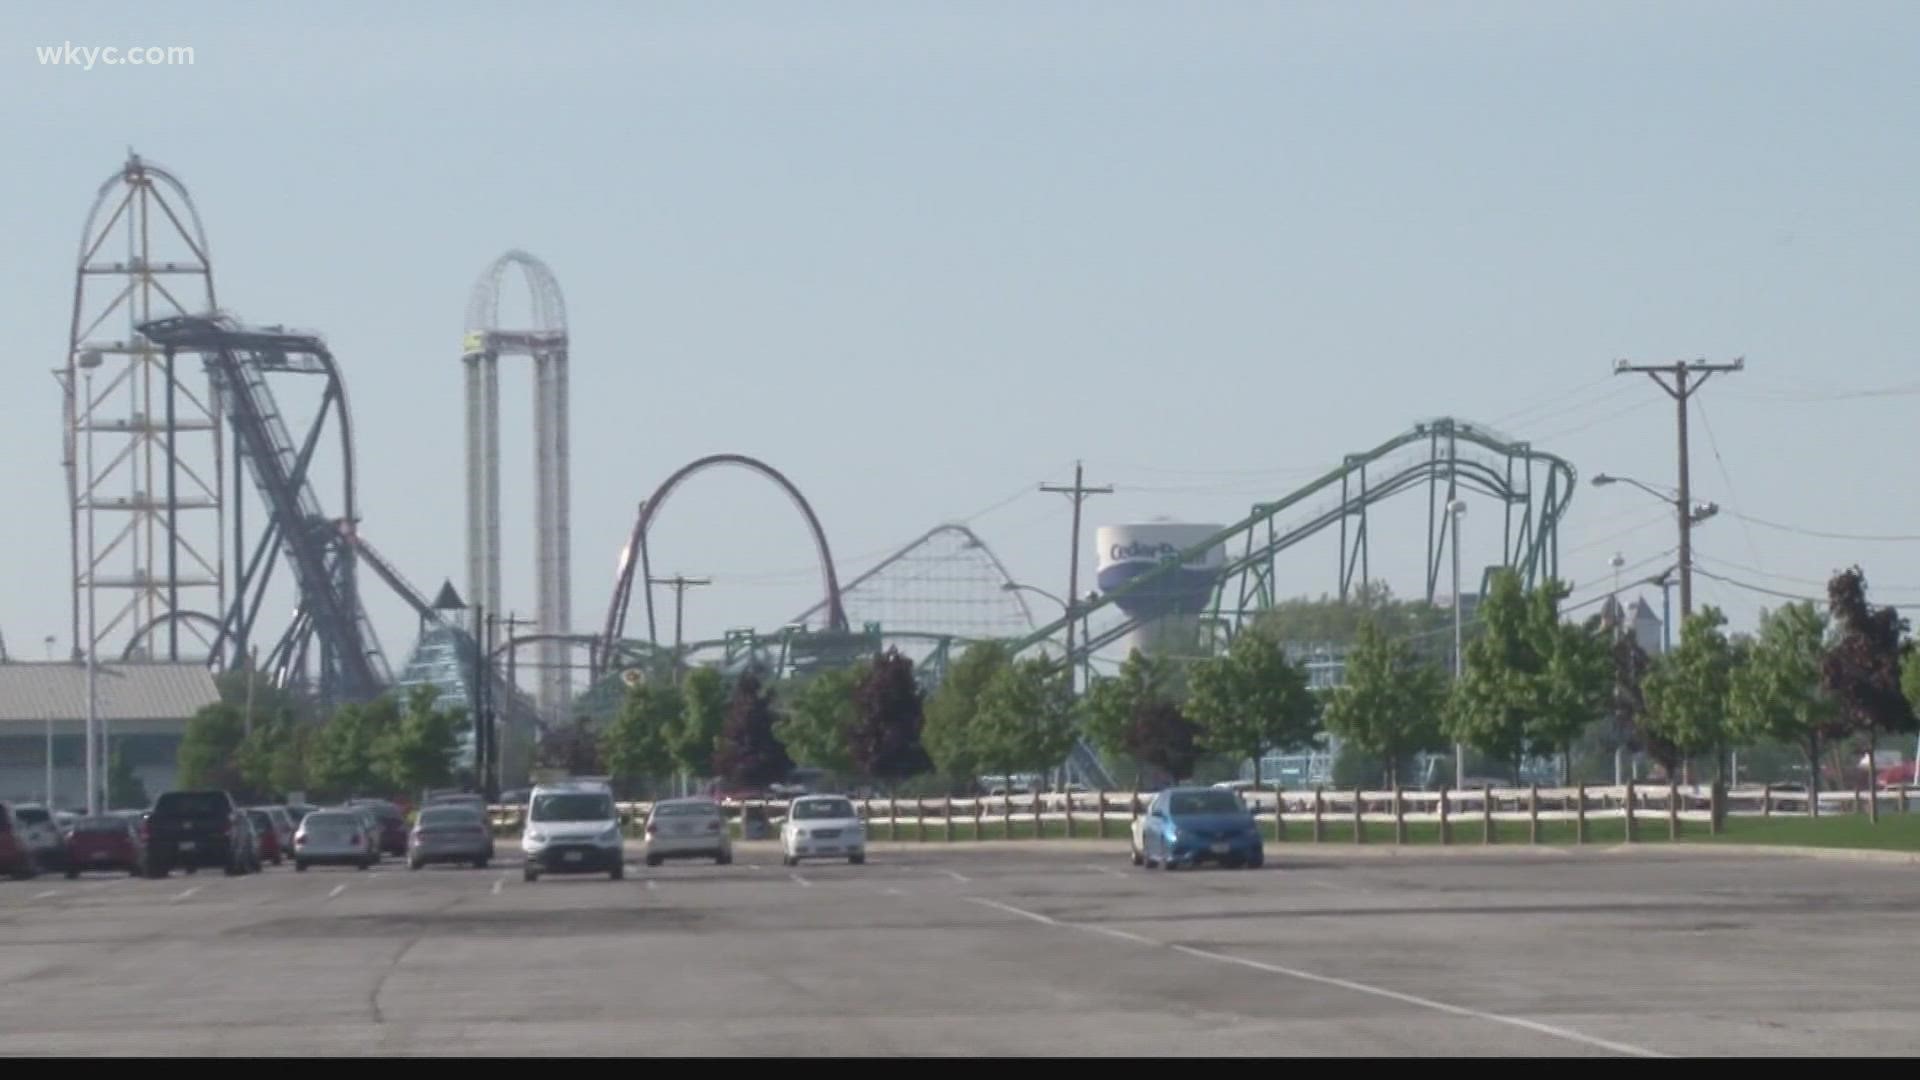 After an accident at Cedar Point Sunday afternoon, several eyewitnesses are coming forward to recount the tragic incident in which a "small metal object" fell.